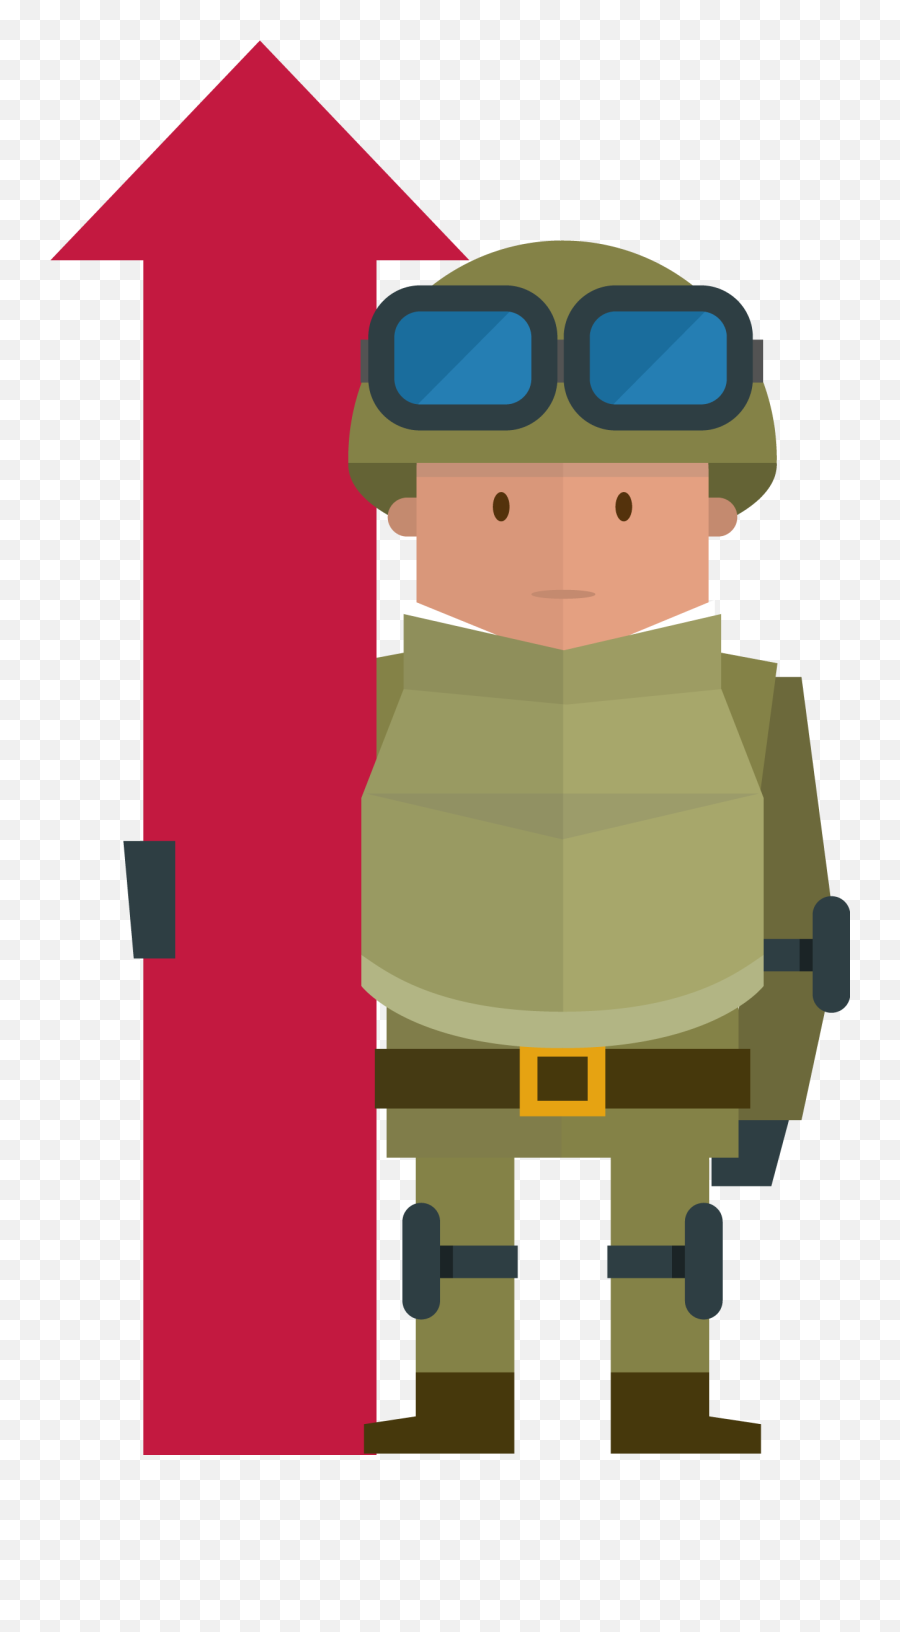 Quick Military Translation - Soldier Clipart Full Size Fictional Character Emoji,Soldier Clipart